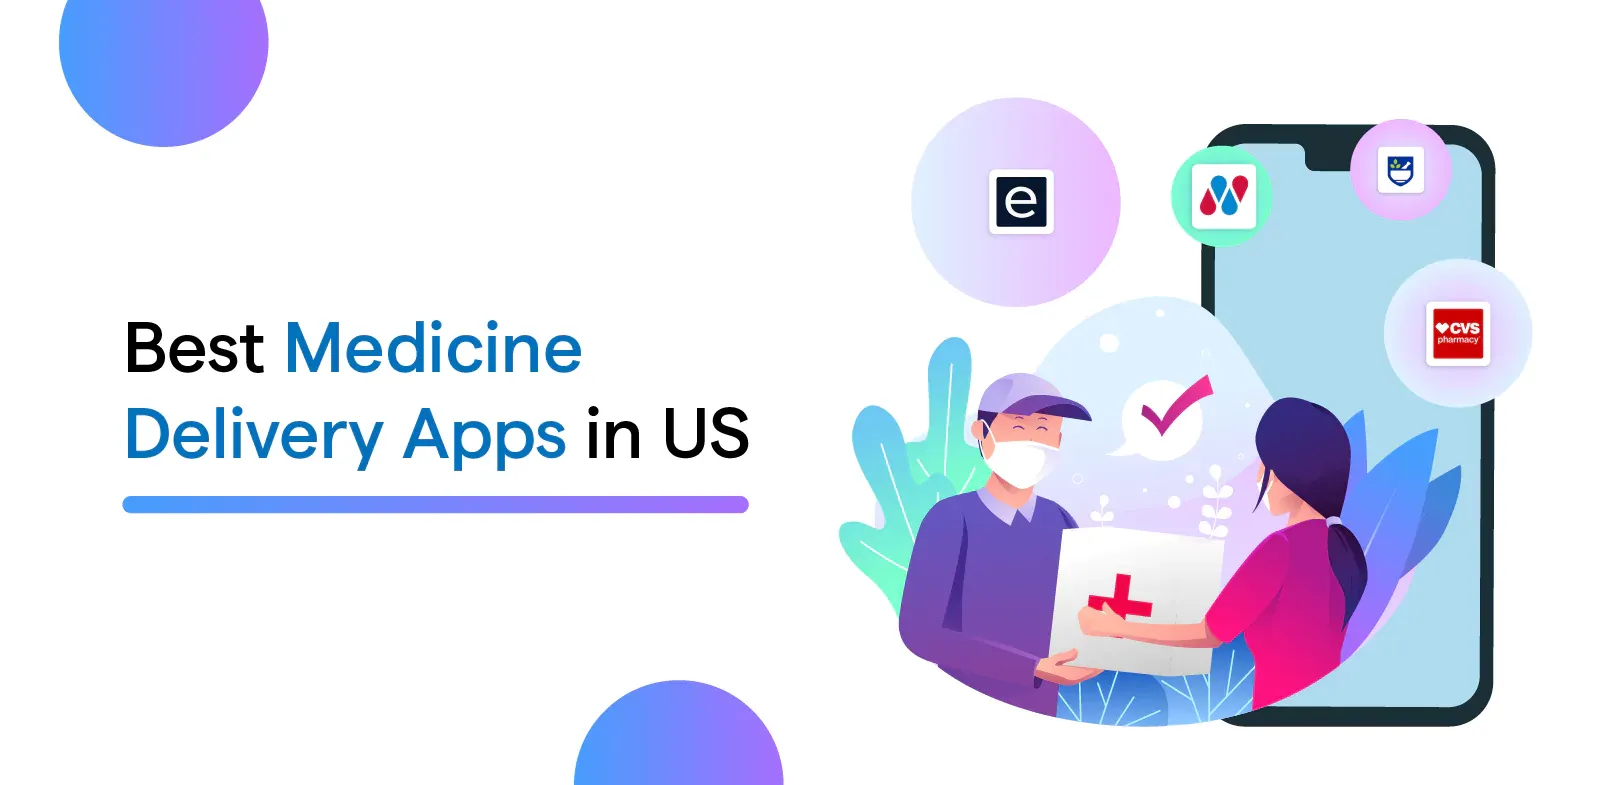 7 Best Medicine Delivery Apps in US